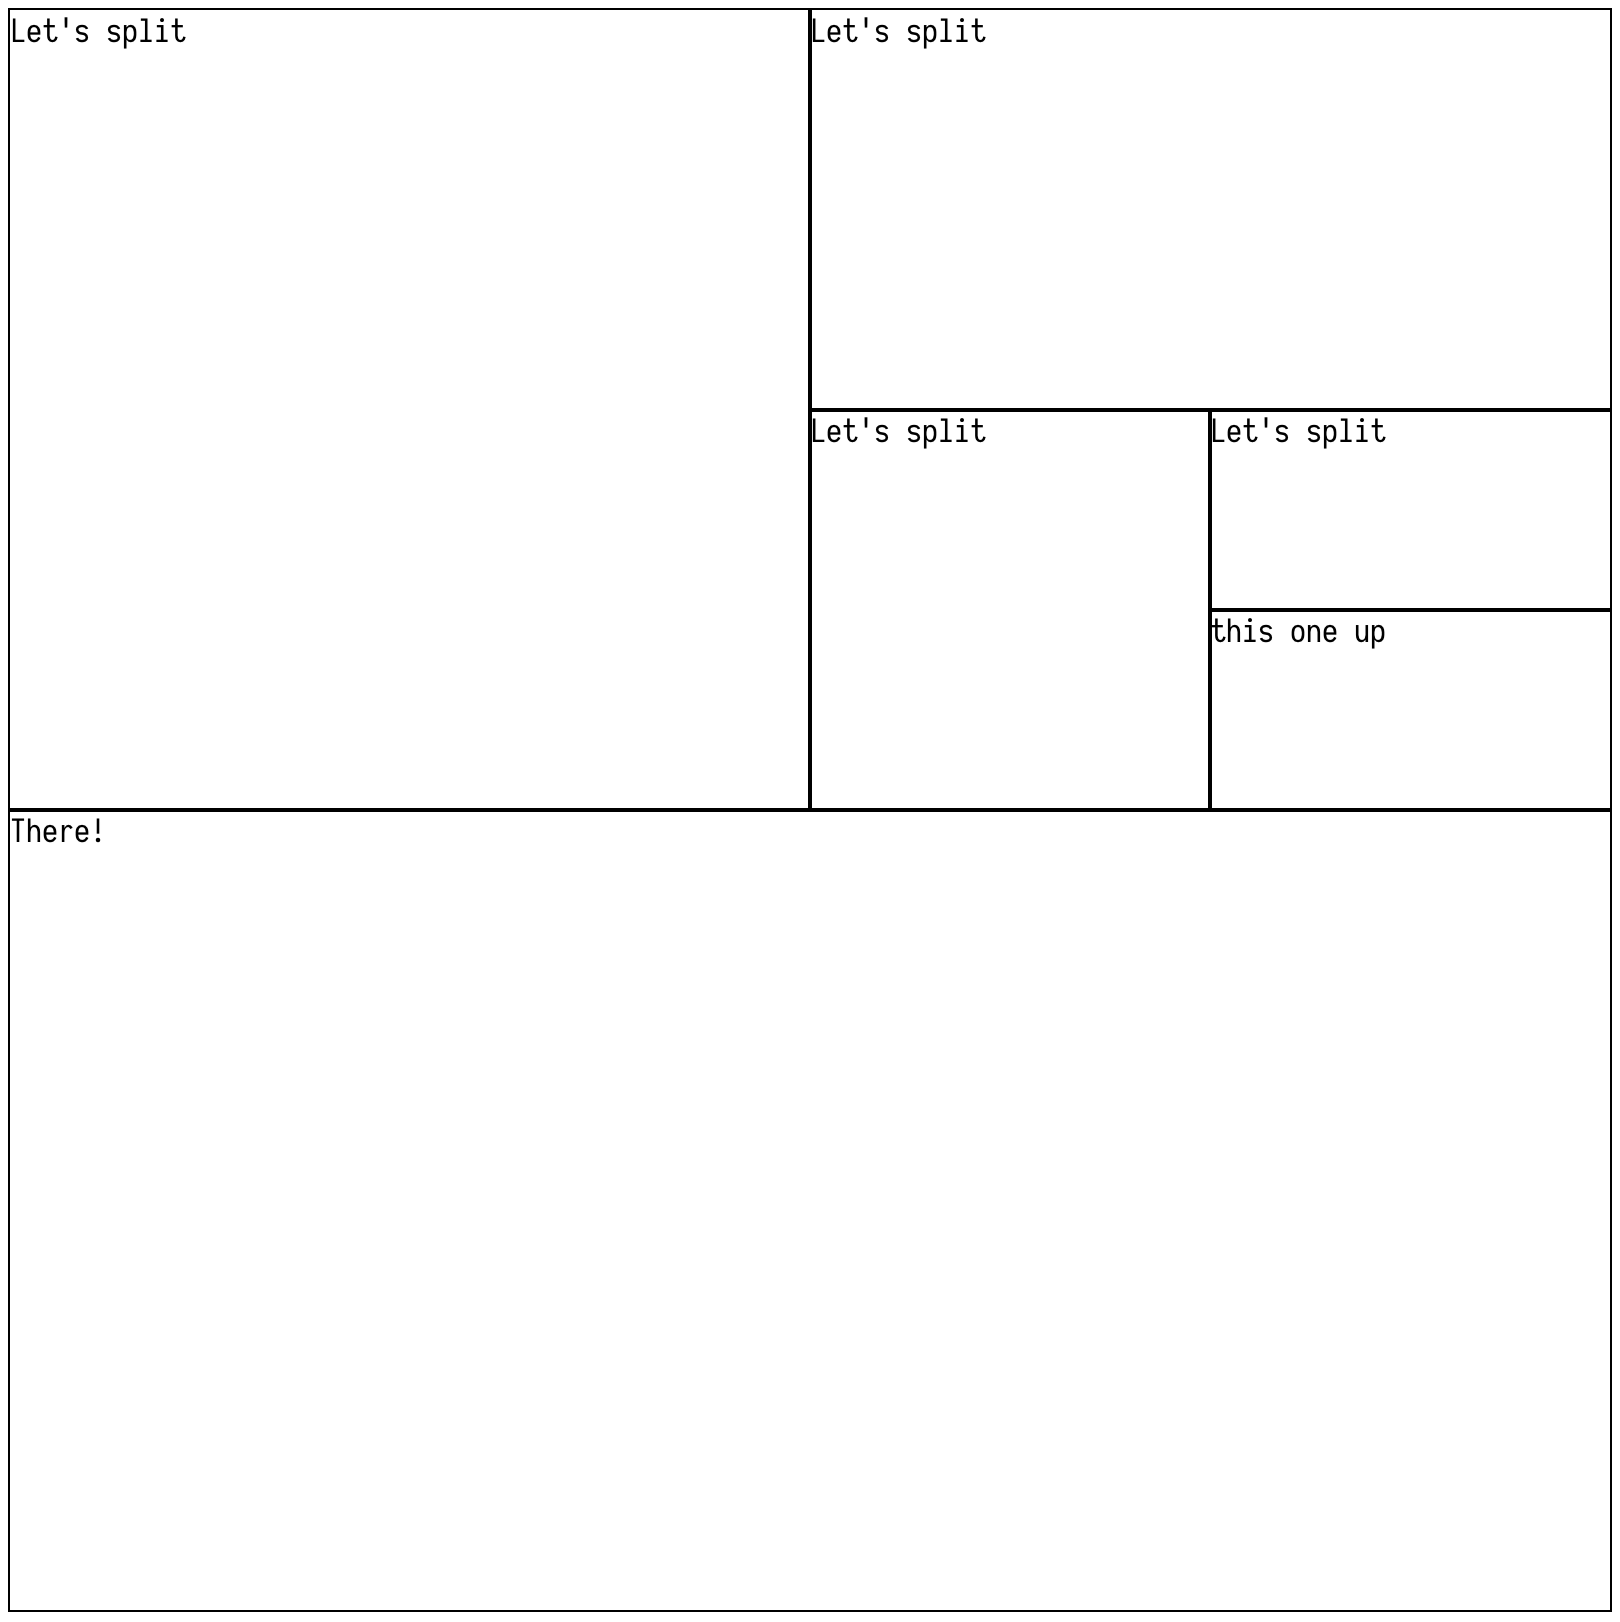 Can create grids within grids